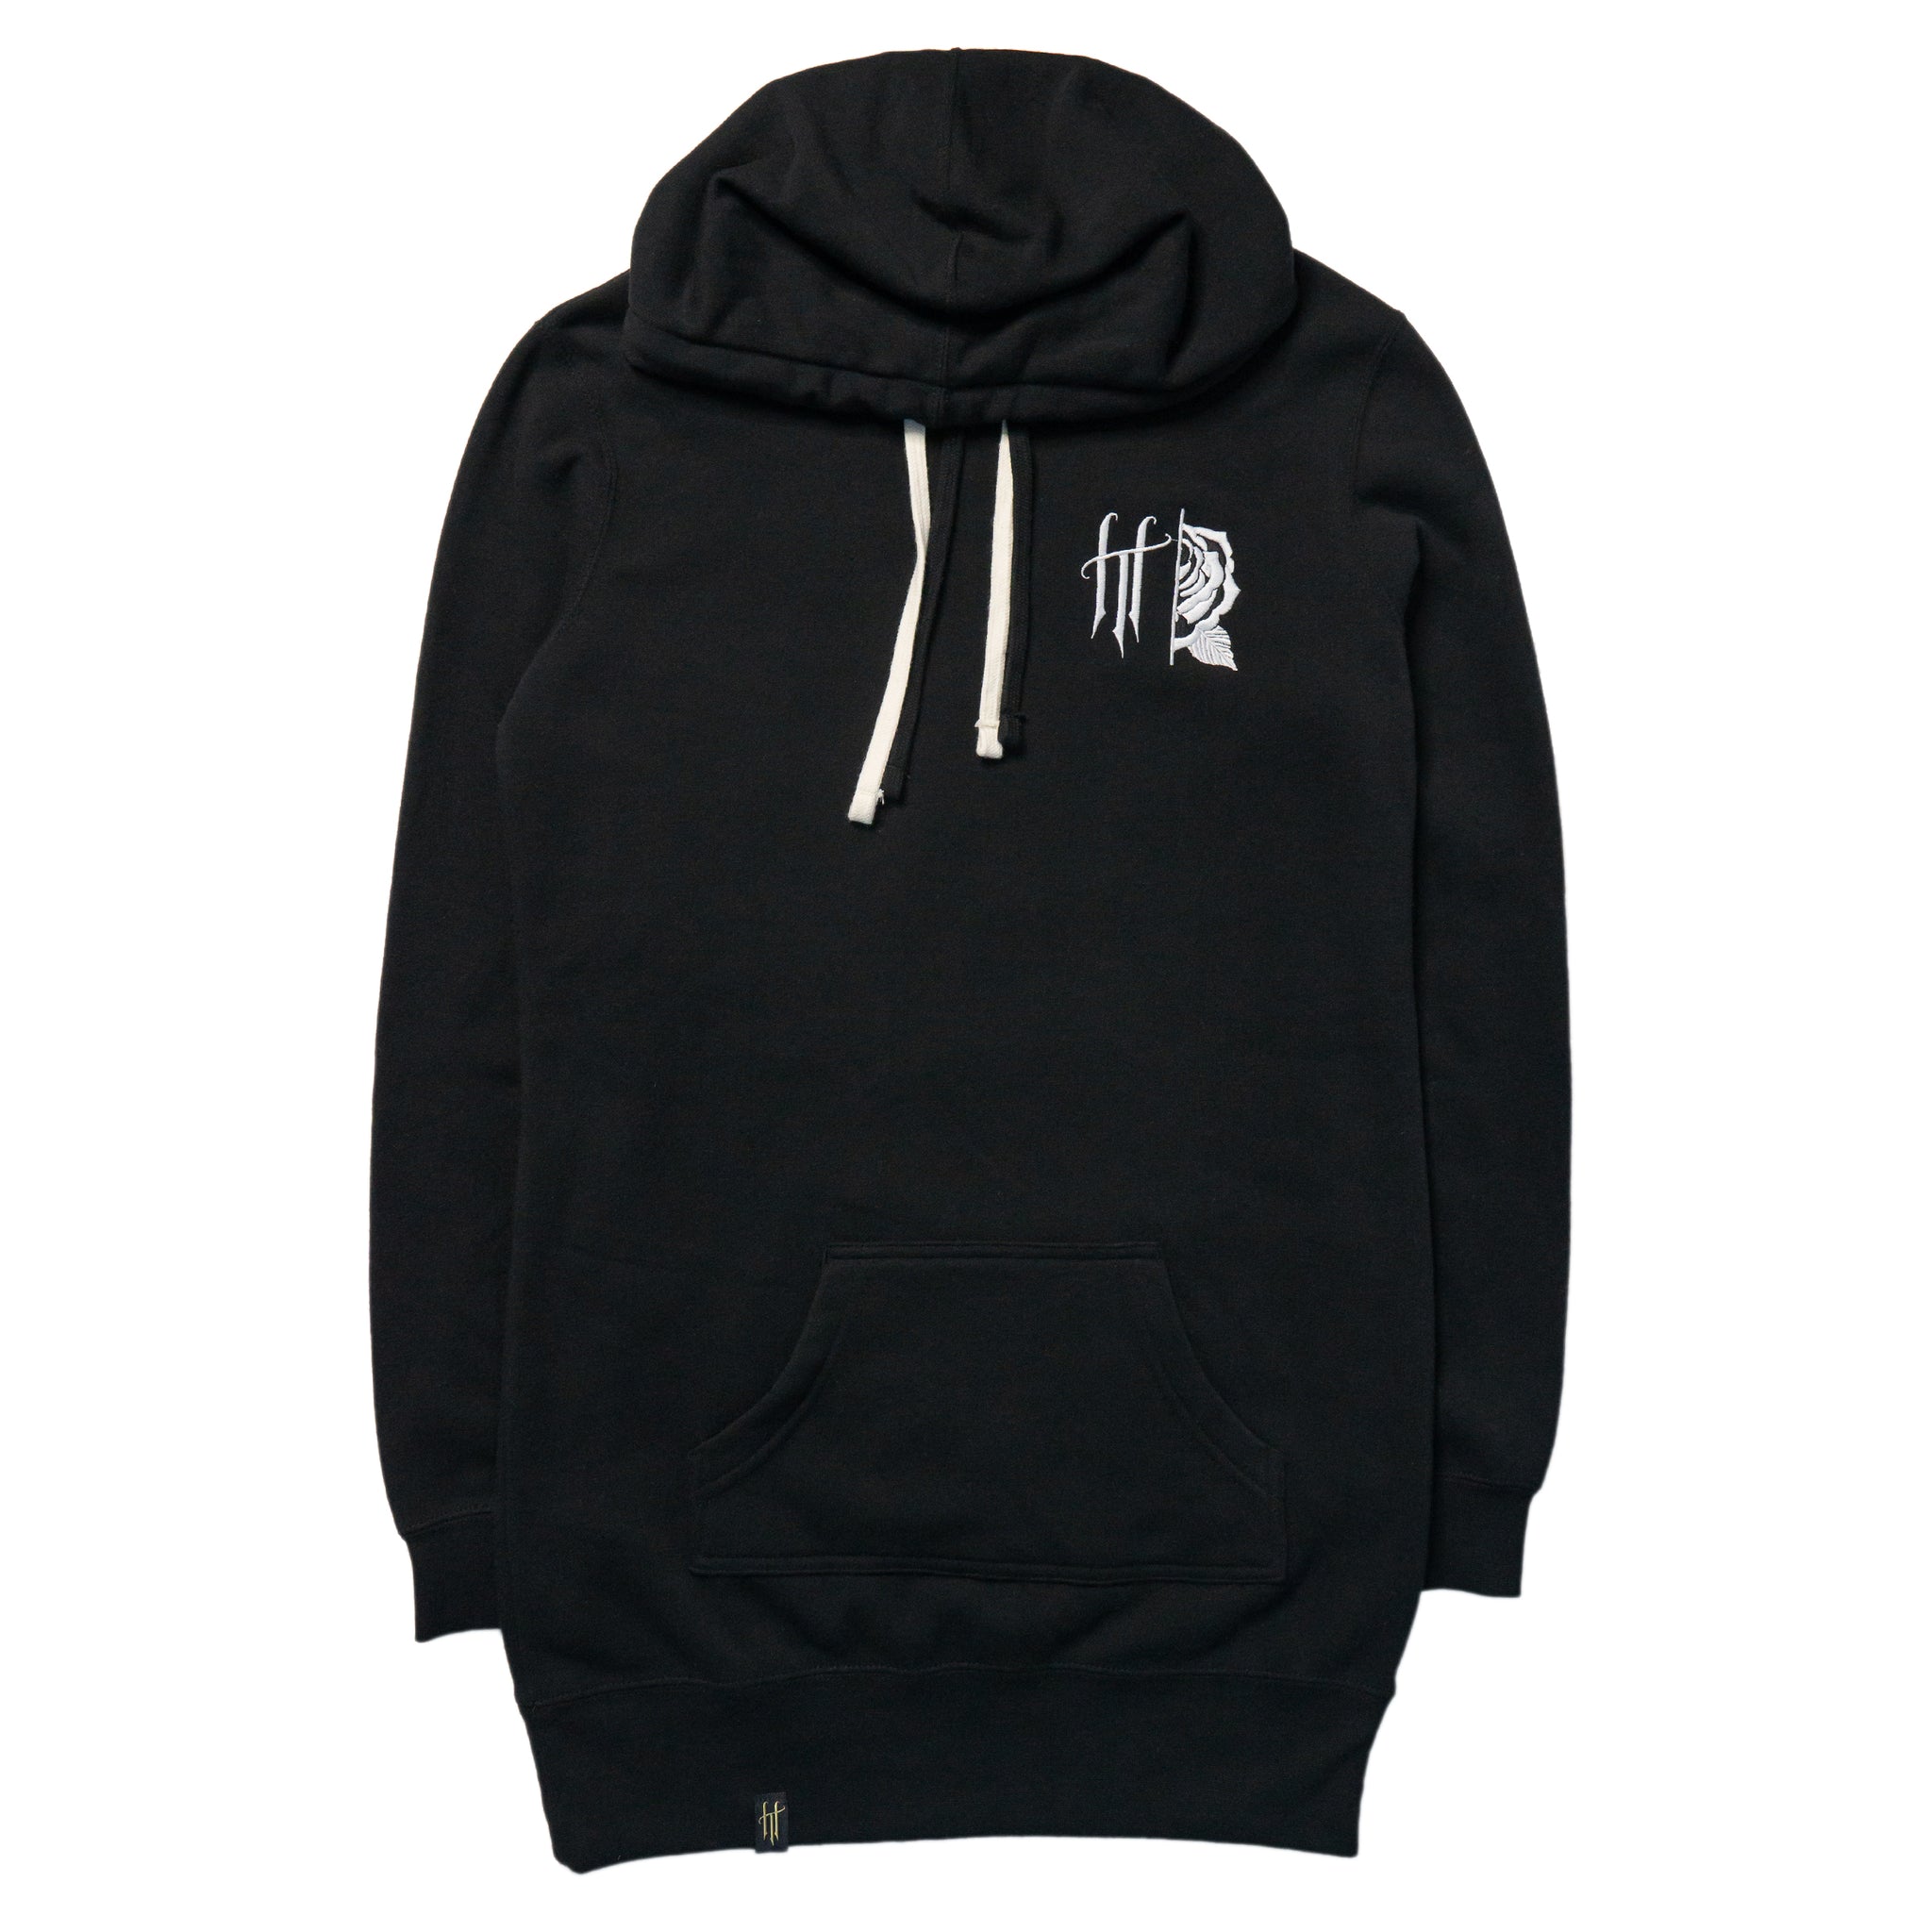 Horrific Thoughts Hooded Pullover Dress (Black)